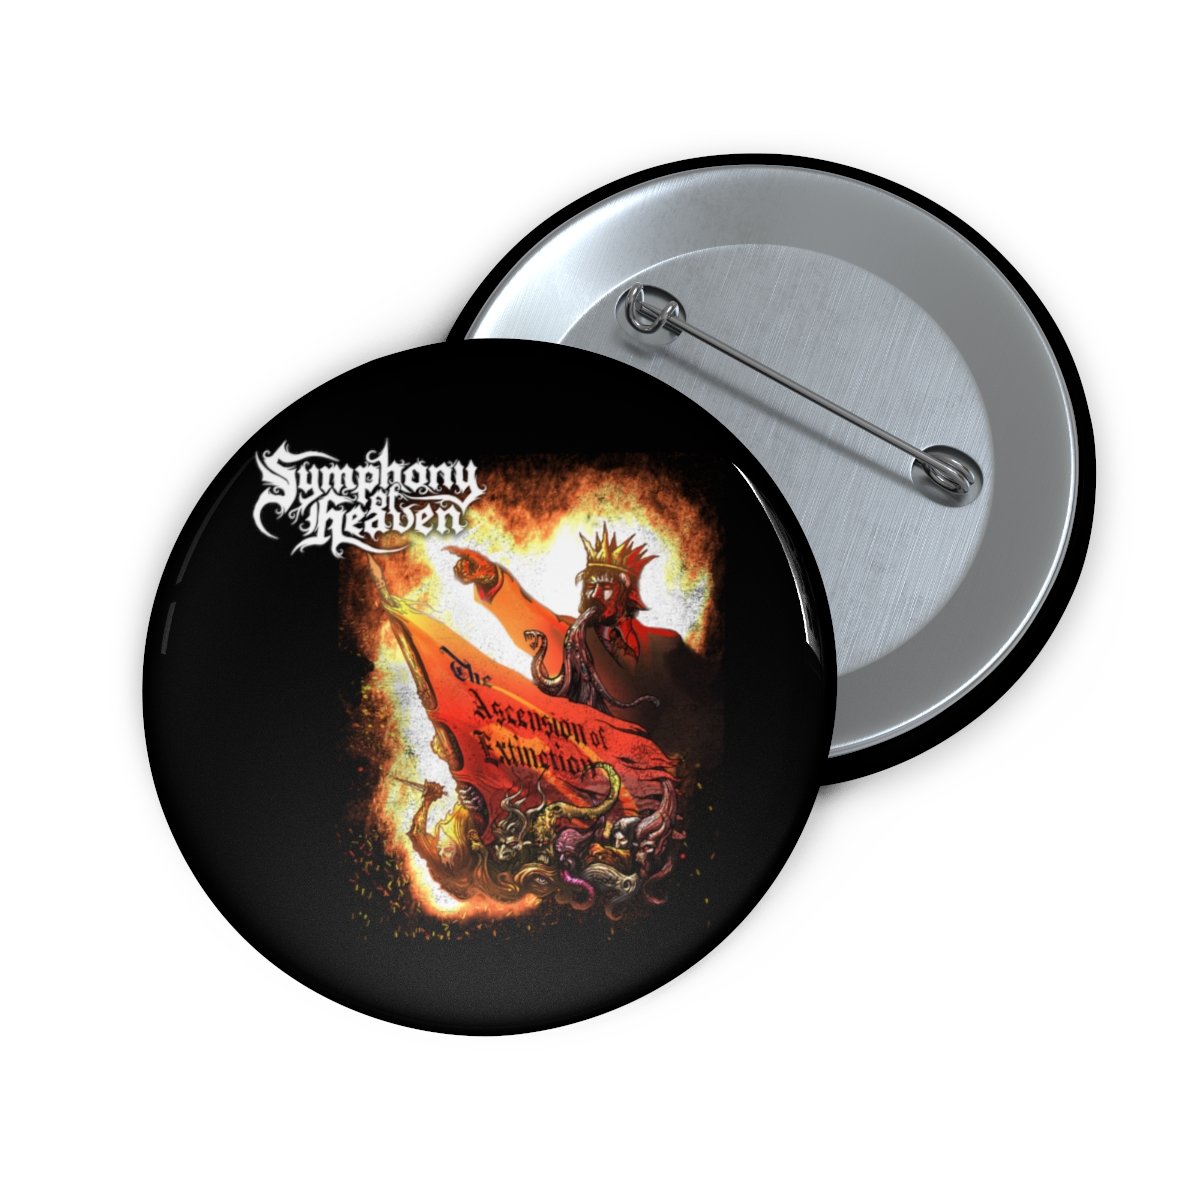 Symphony of Heaven – The Ascension of Extinction Pin Buttons